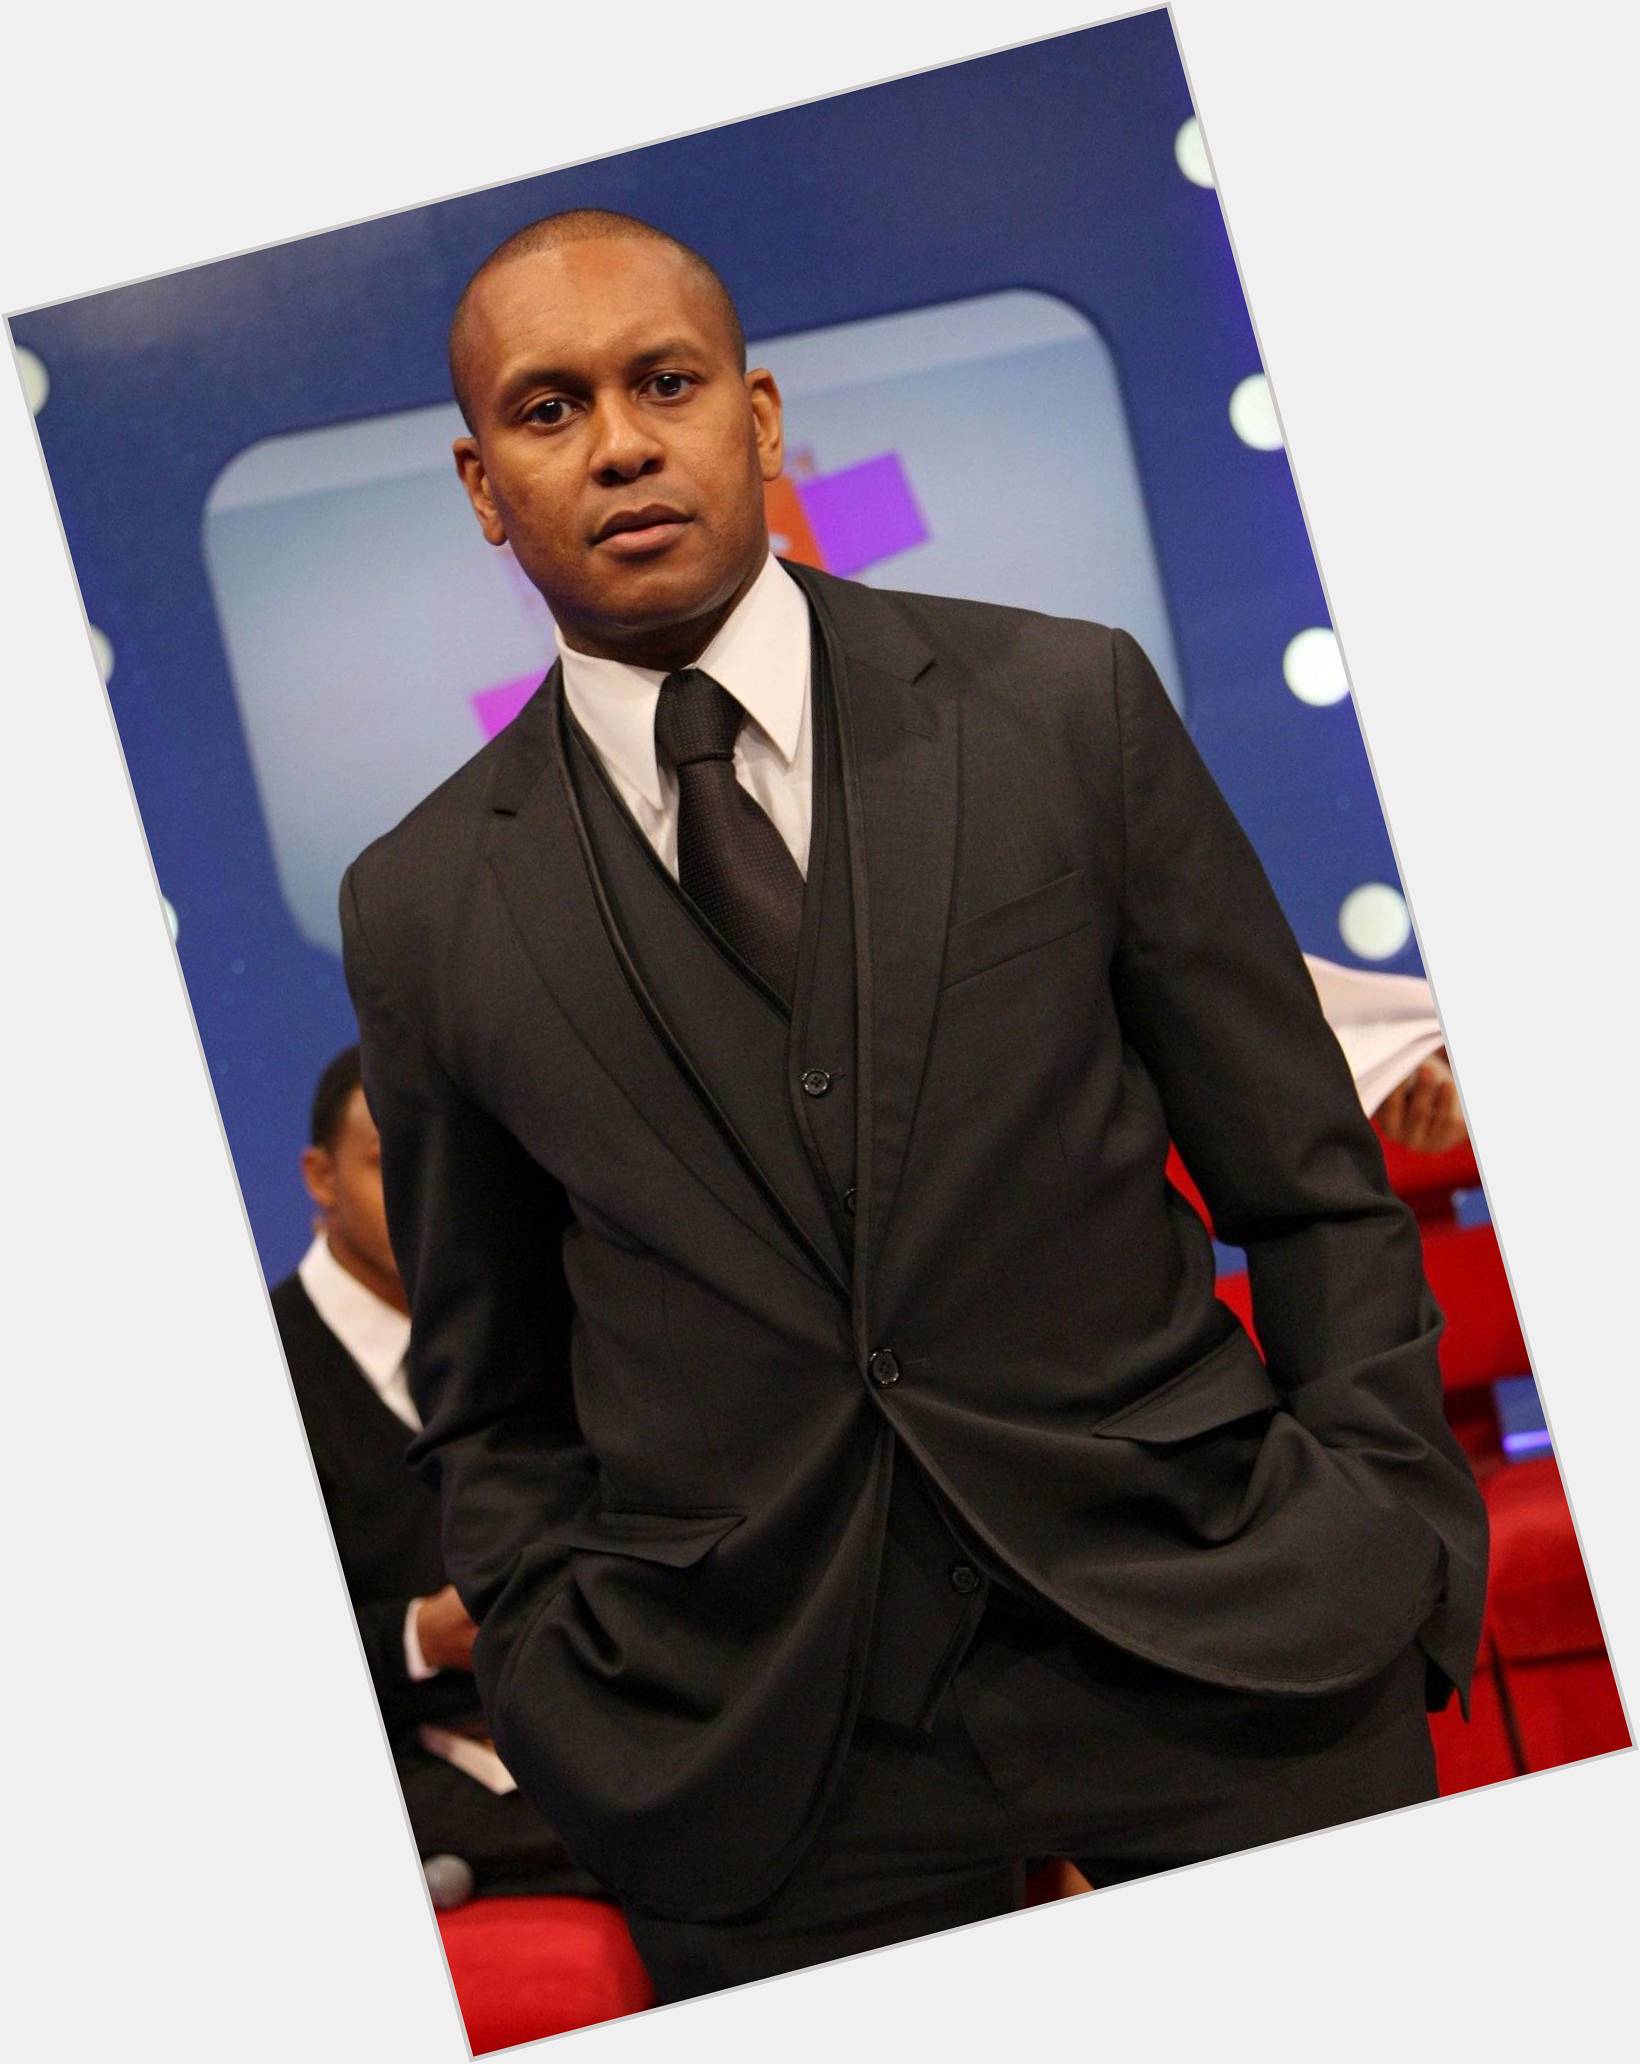 <a href="/hot-men/kevin-powell/is-he-married-sick-dating-krazy-woman-beater">Kevin Powell</a>  